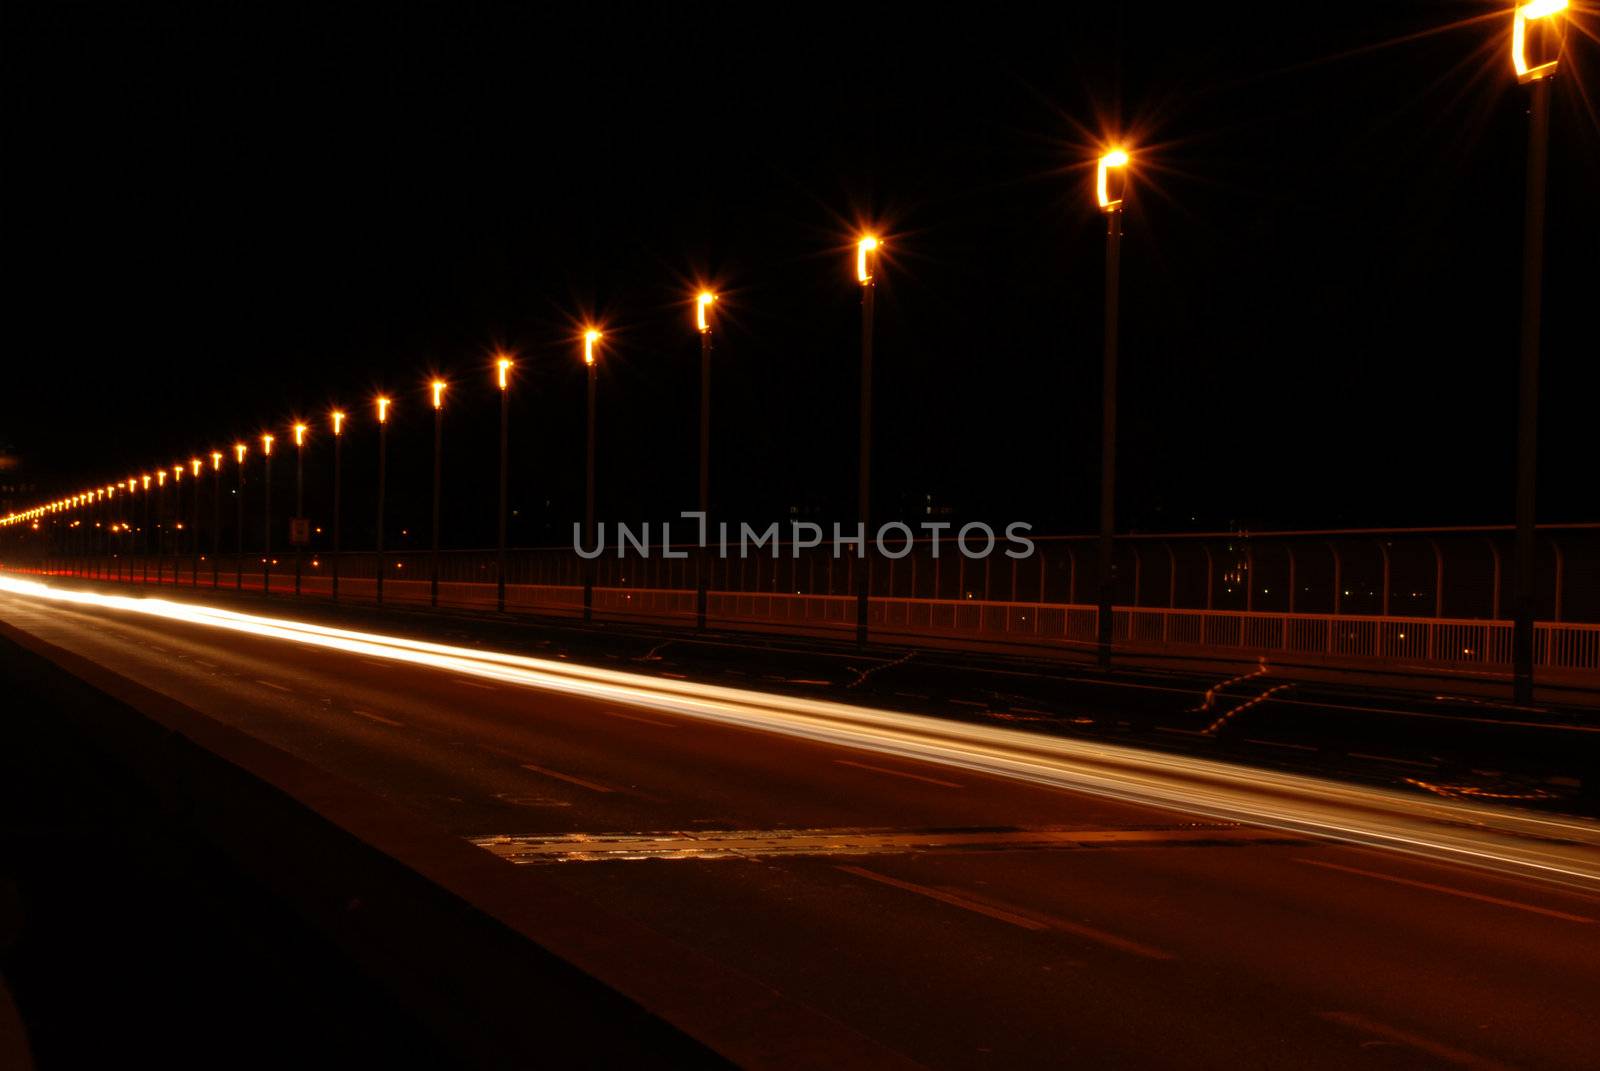 The traffic on the road on the bridge in Prague in the night